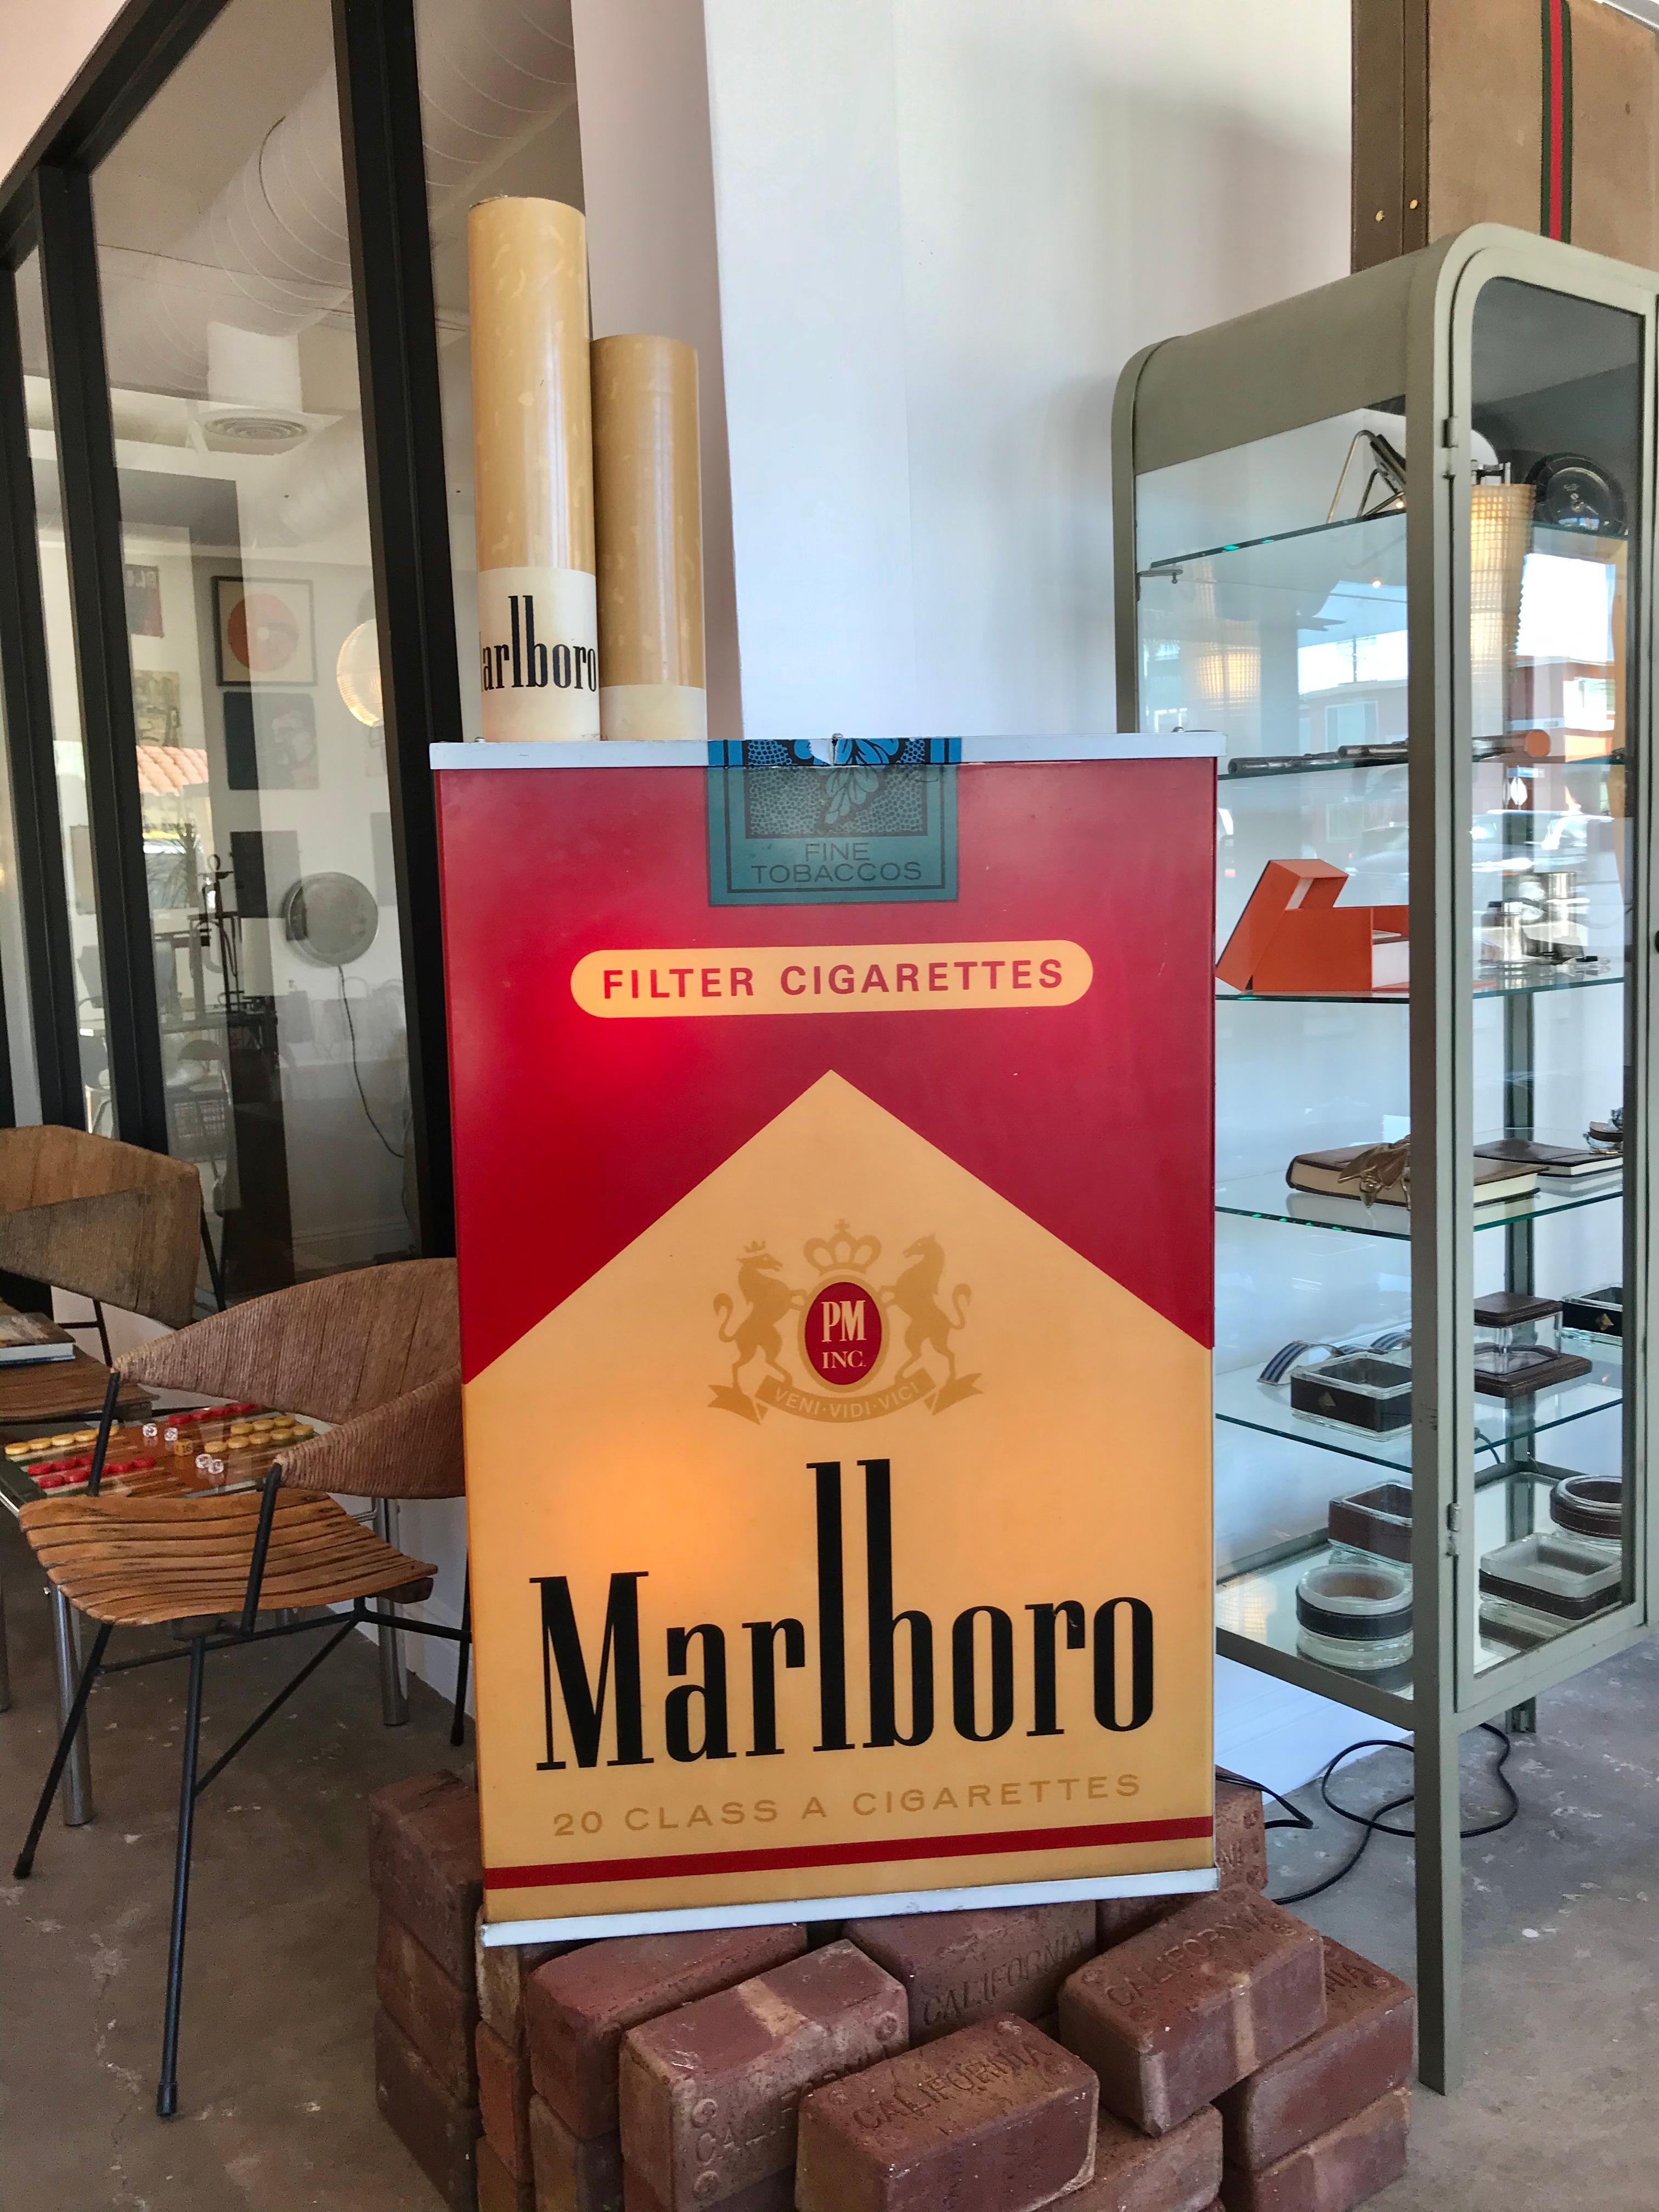 Fantastic vintage advertising light up box by Marlboro. Massive scale. Looks great hanging on the wall or on the ground. Acrylic sides and cigarettes with metal frame. Electrical works perfectly. Looks good on or off. Great piece of pop art!